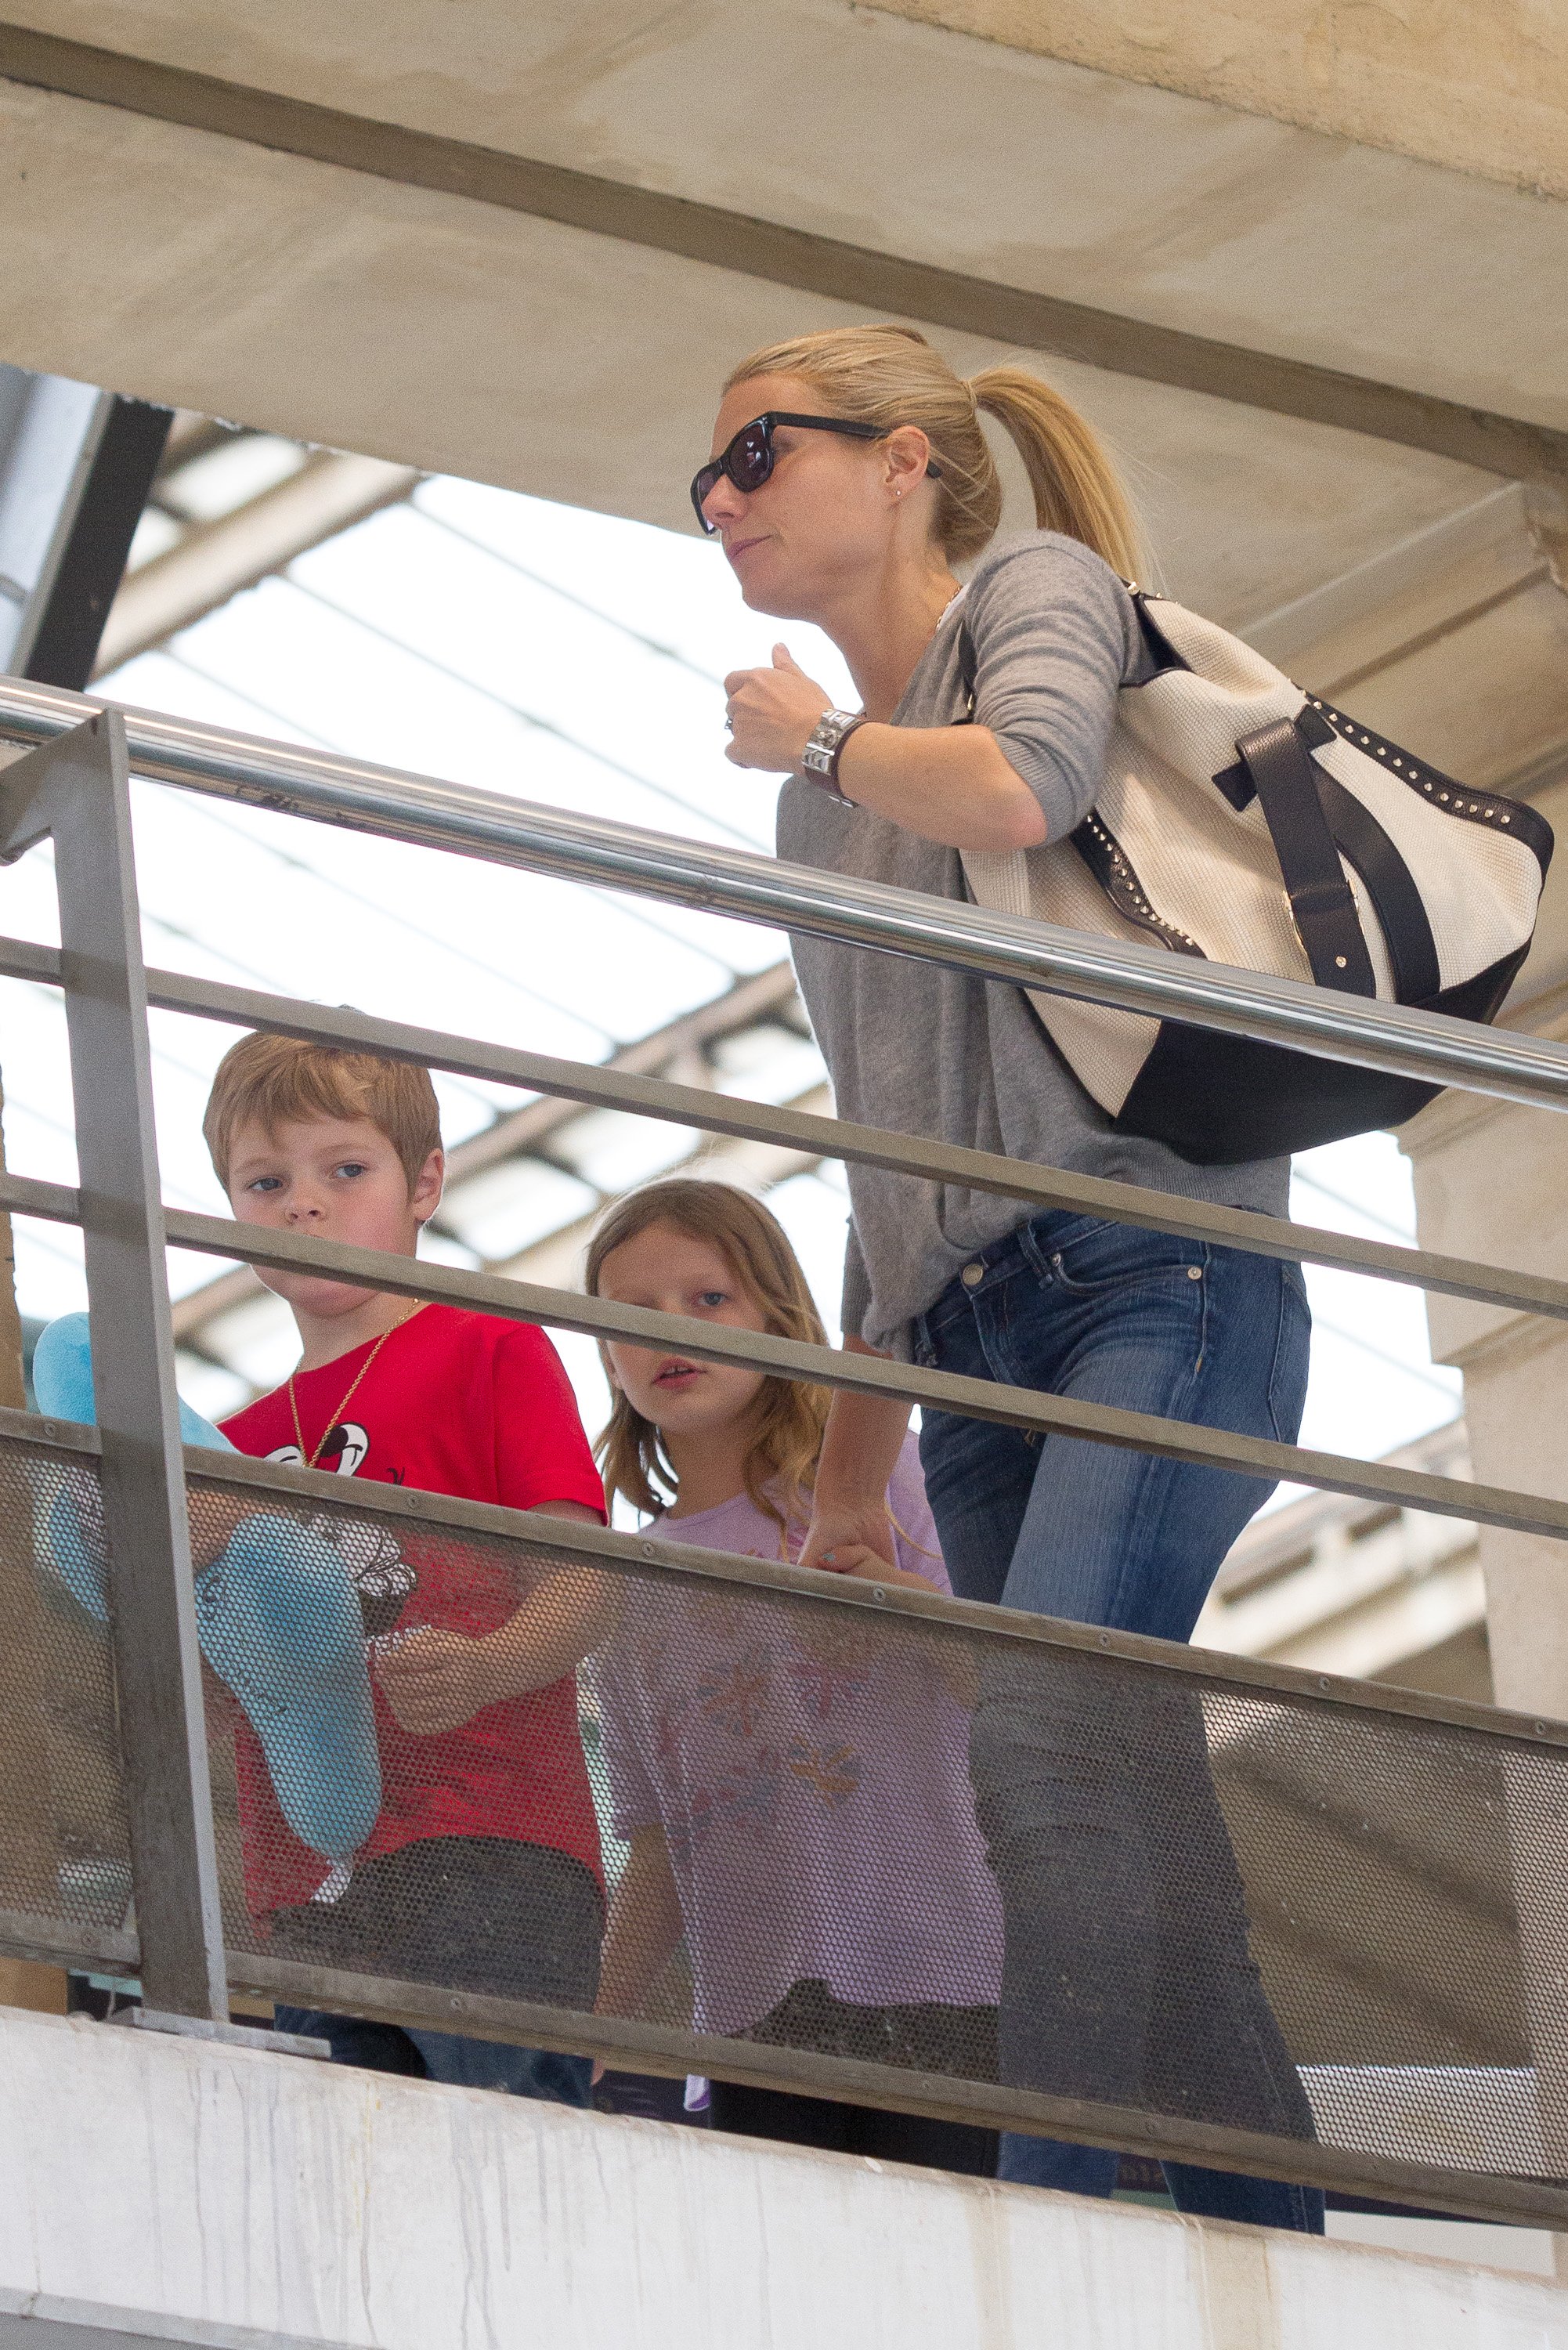 Gwyneth Paltrow and her children, son Moses and daughter Apple arriving at the Gare du Nord station on April 15, 2013 in Paris, France. / Source: Getty Images